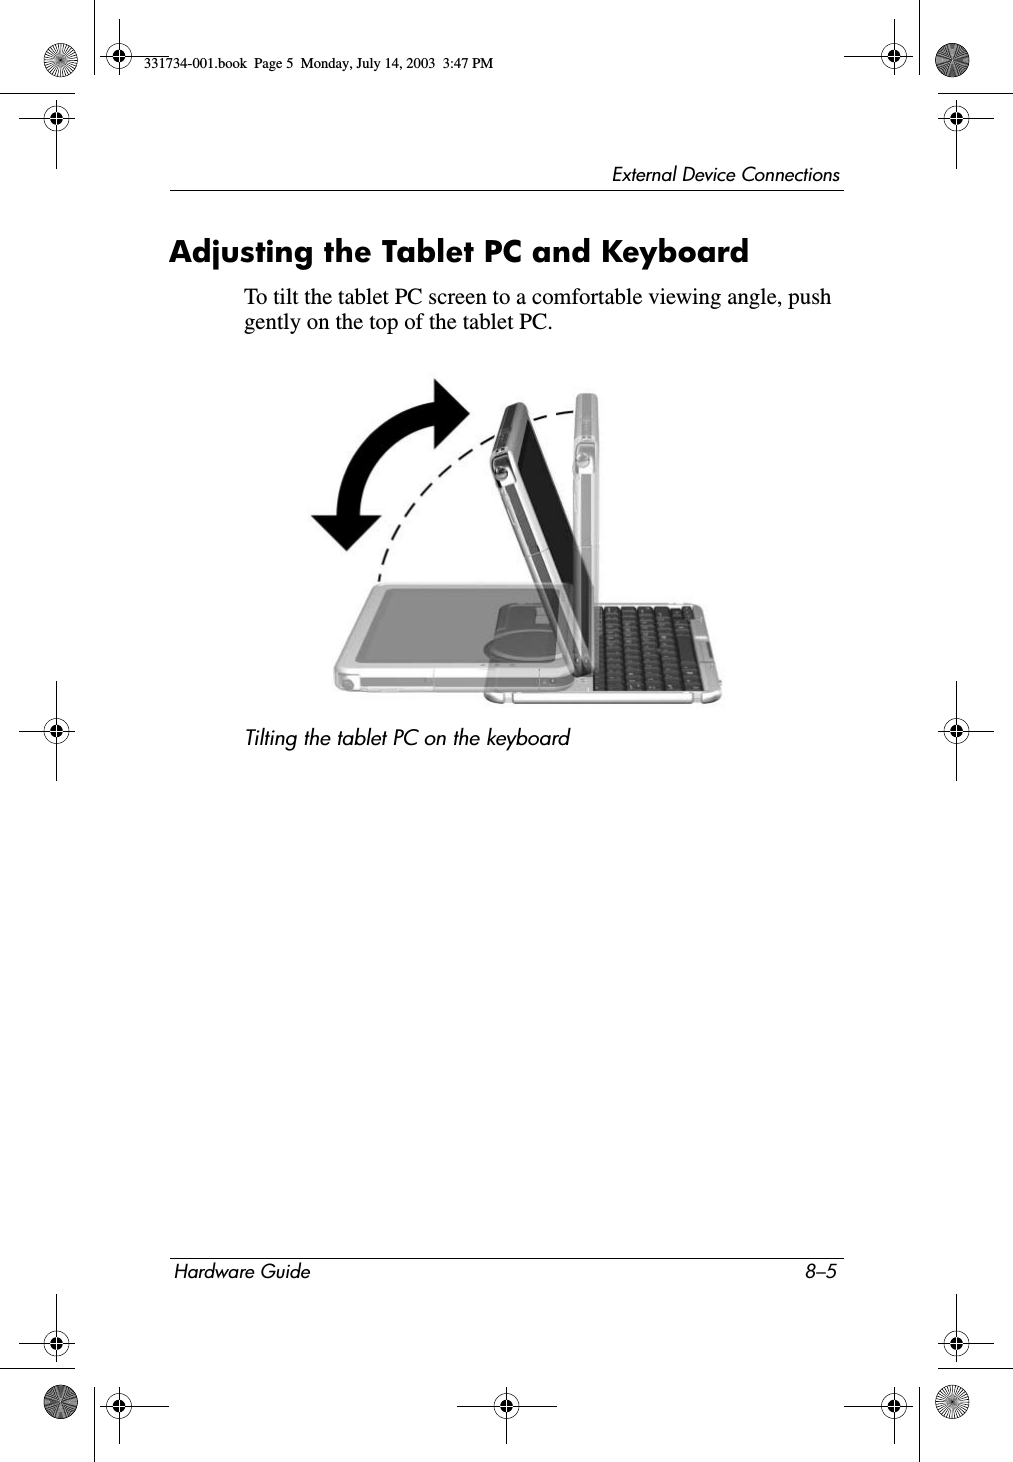 External Device ConnectionsHardware Guide 8–5Adjusting the Tablet PC and KeyboardTo tilt the tablet PC screen to a comfortable viewing angle, push gently on the top of the tablet PC.Tilting the tablet PC on the keyboard331734-001.book  Page 5  Monday, July 14, 2003  3:47 PM